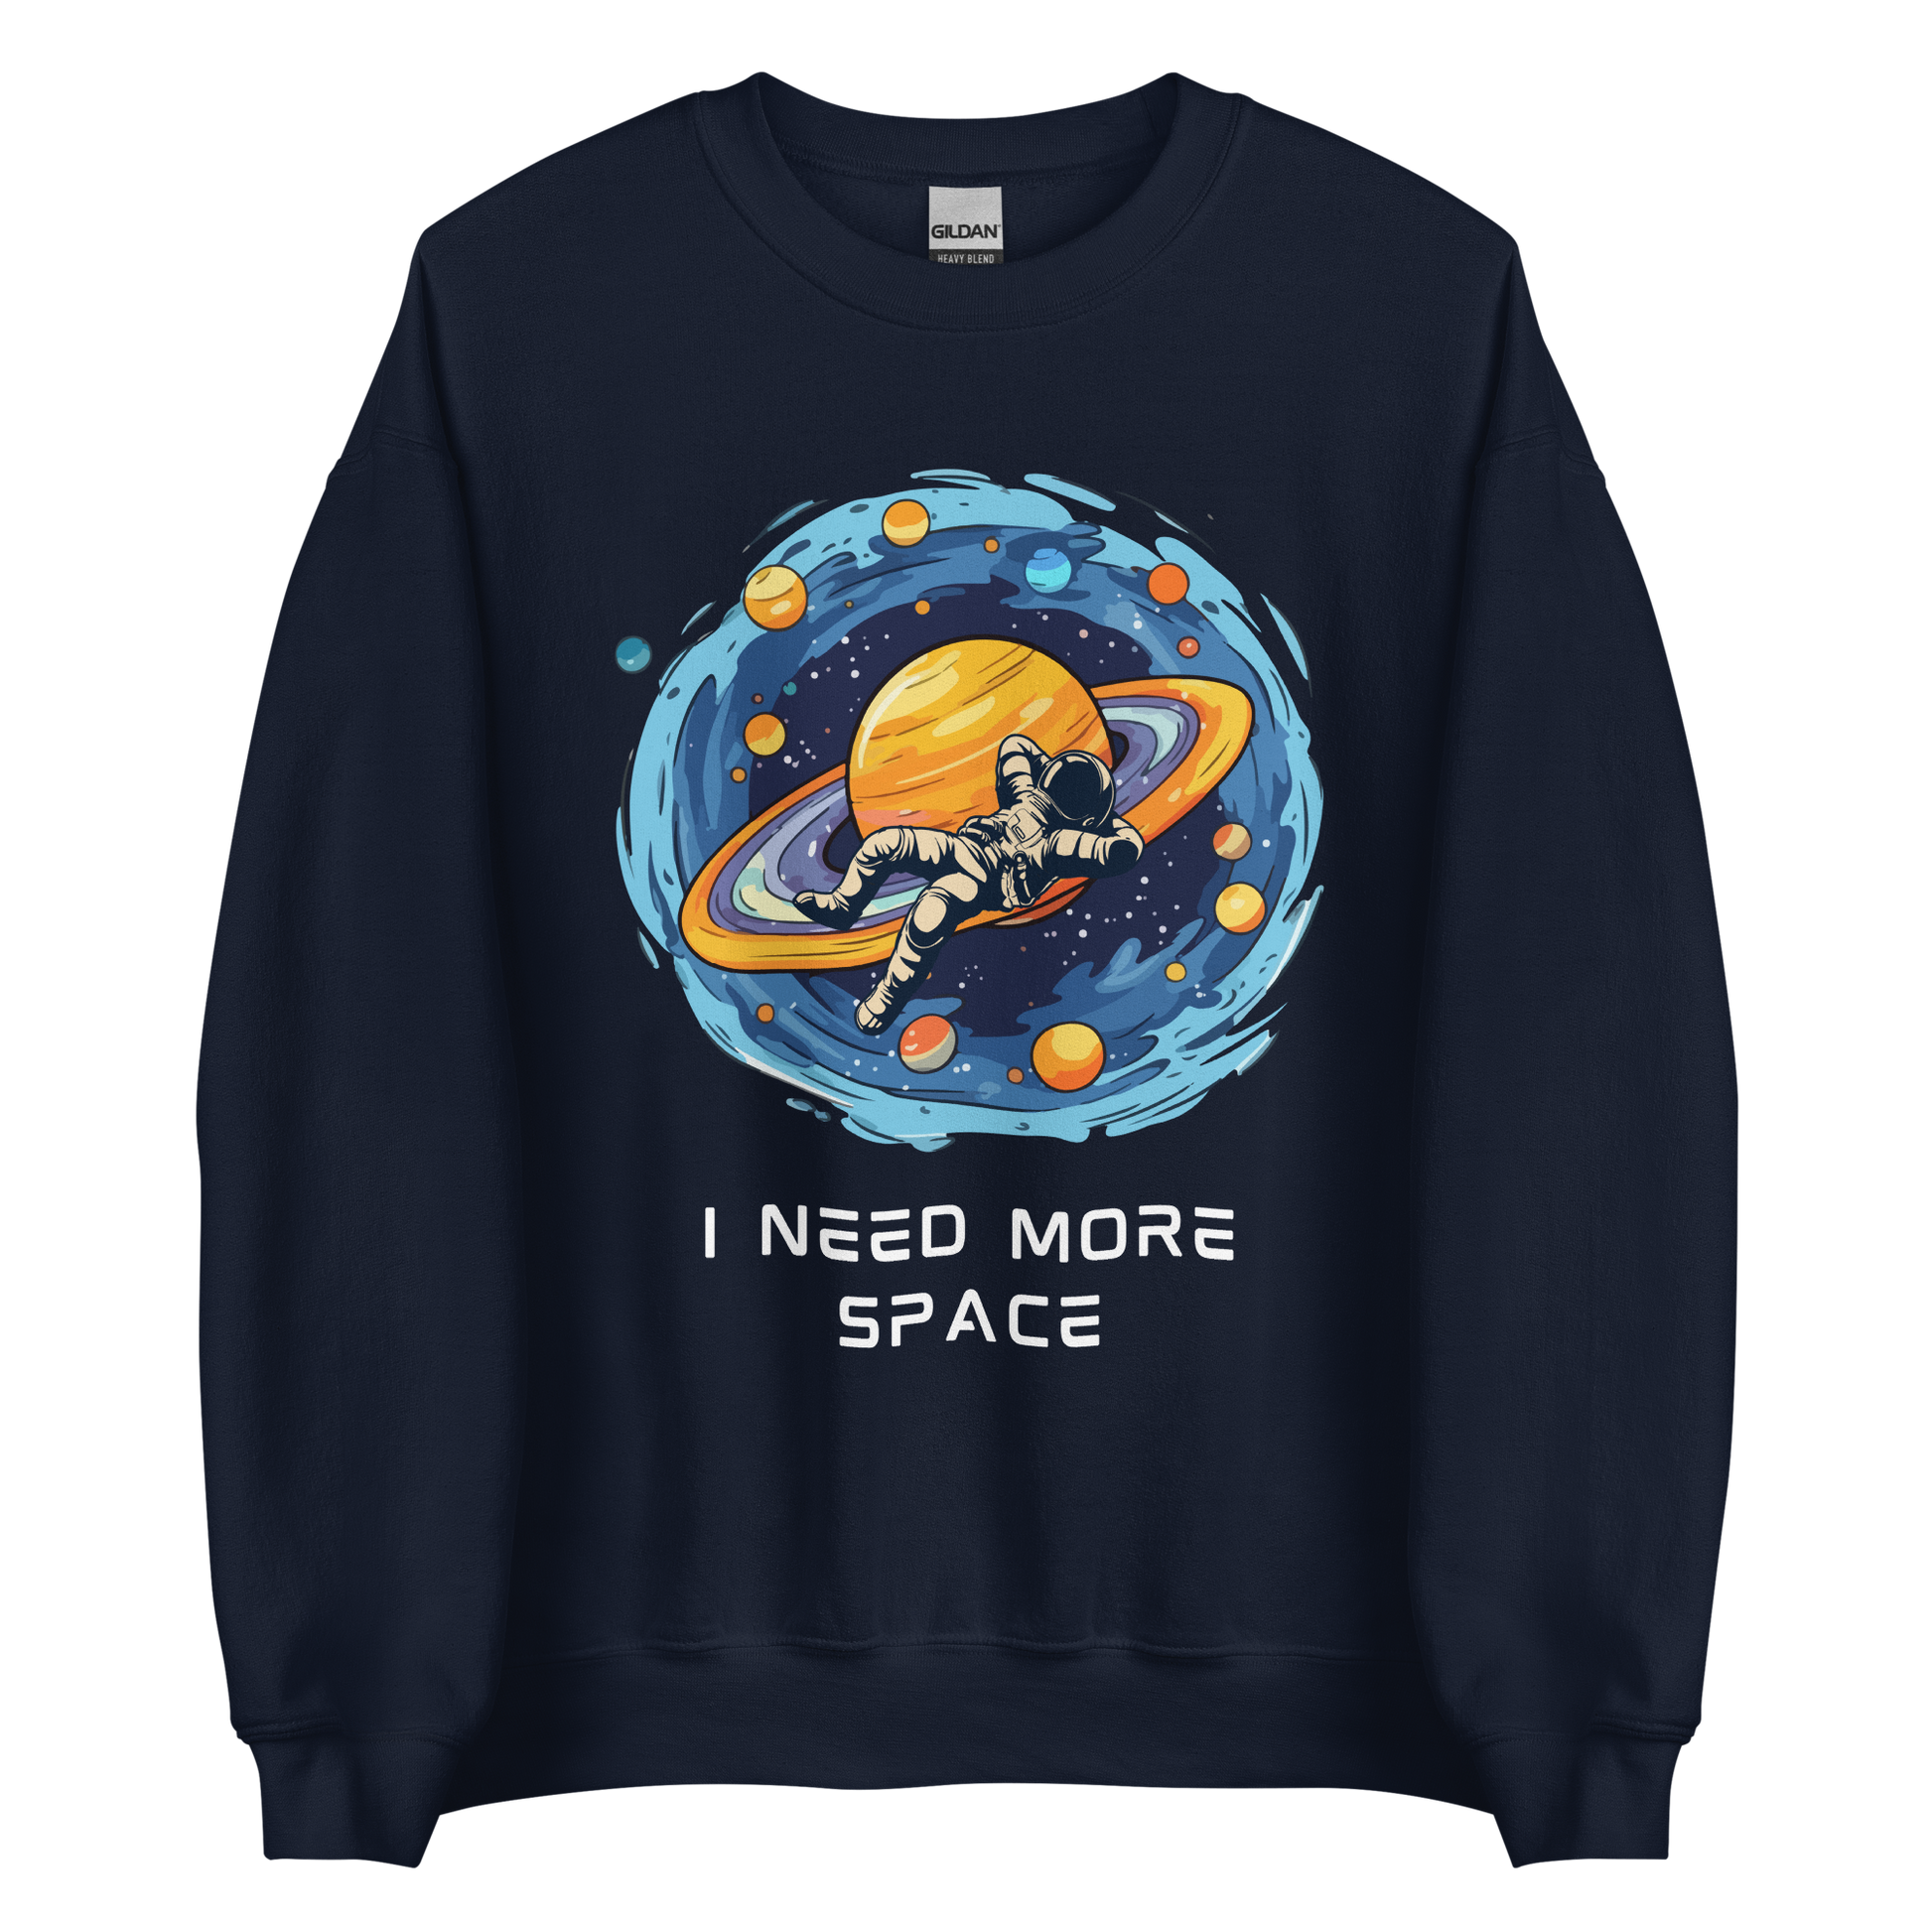 Navy Astronaut Sweatshirt featuring a captivating I Need More Space graphic on the chest - Funny Graphic Space Sweatshirts - Boozy Fox